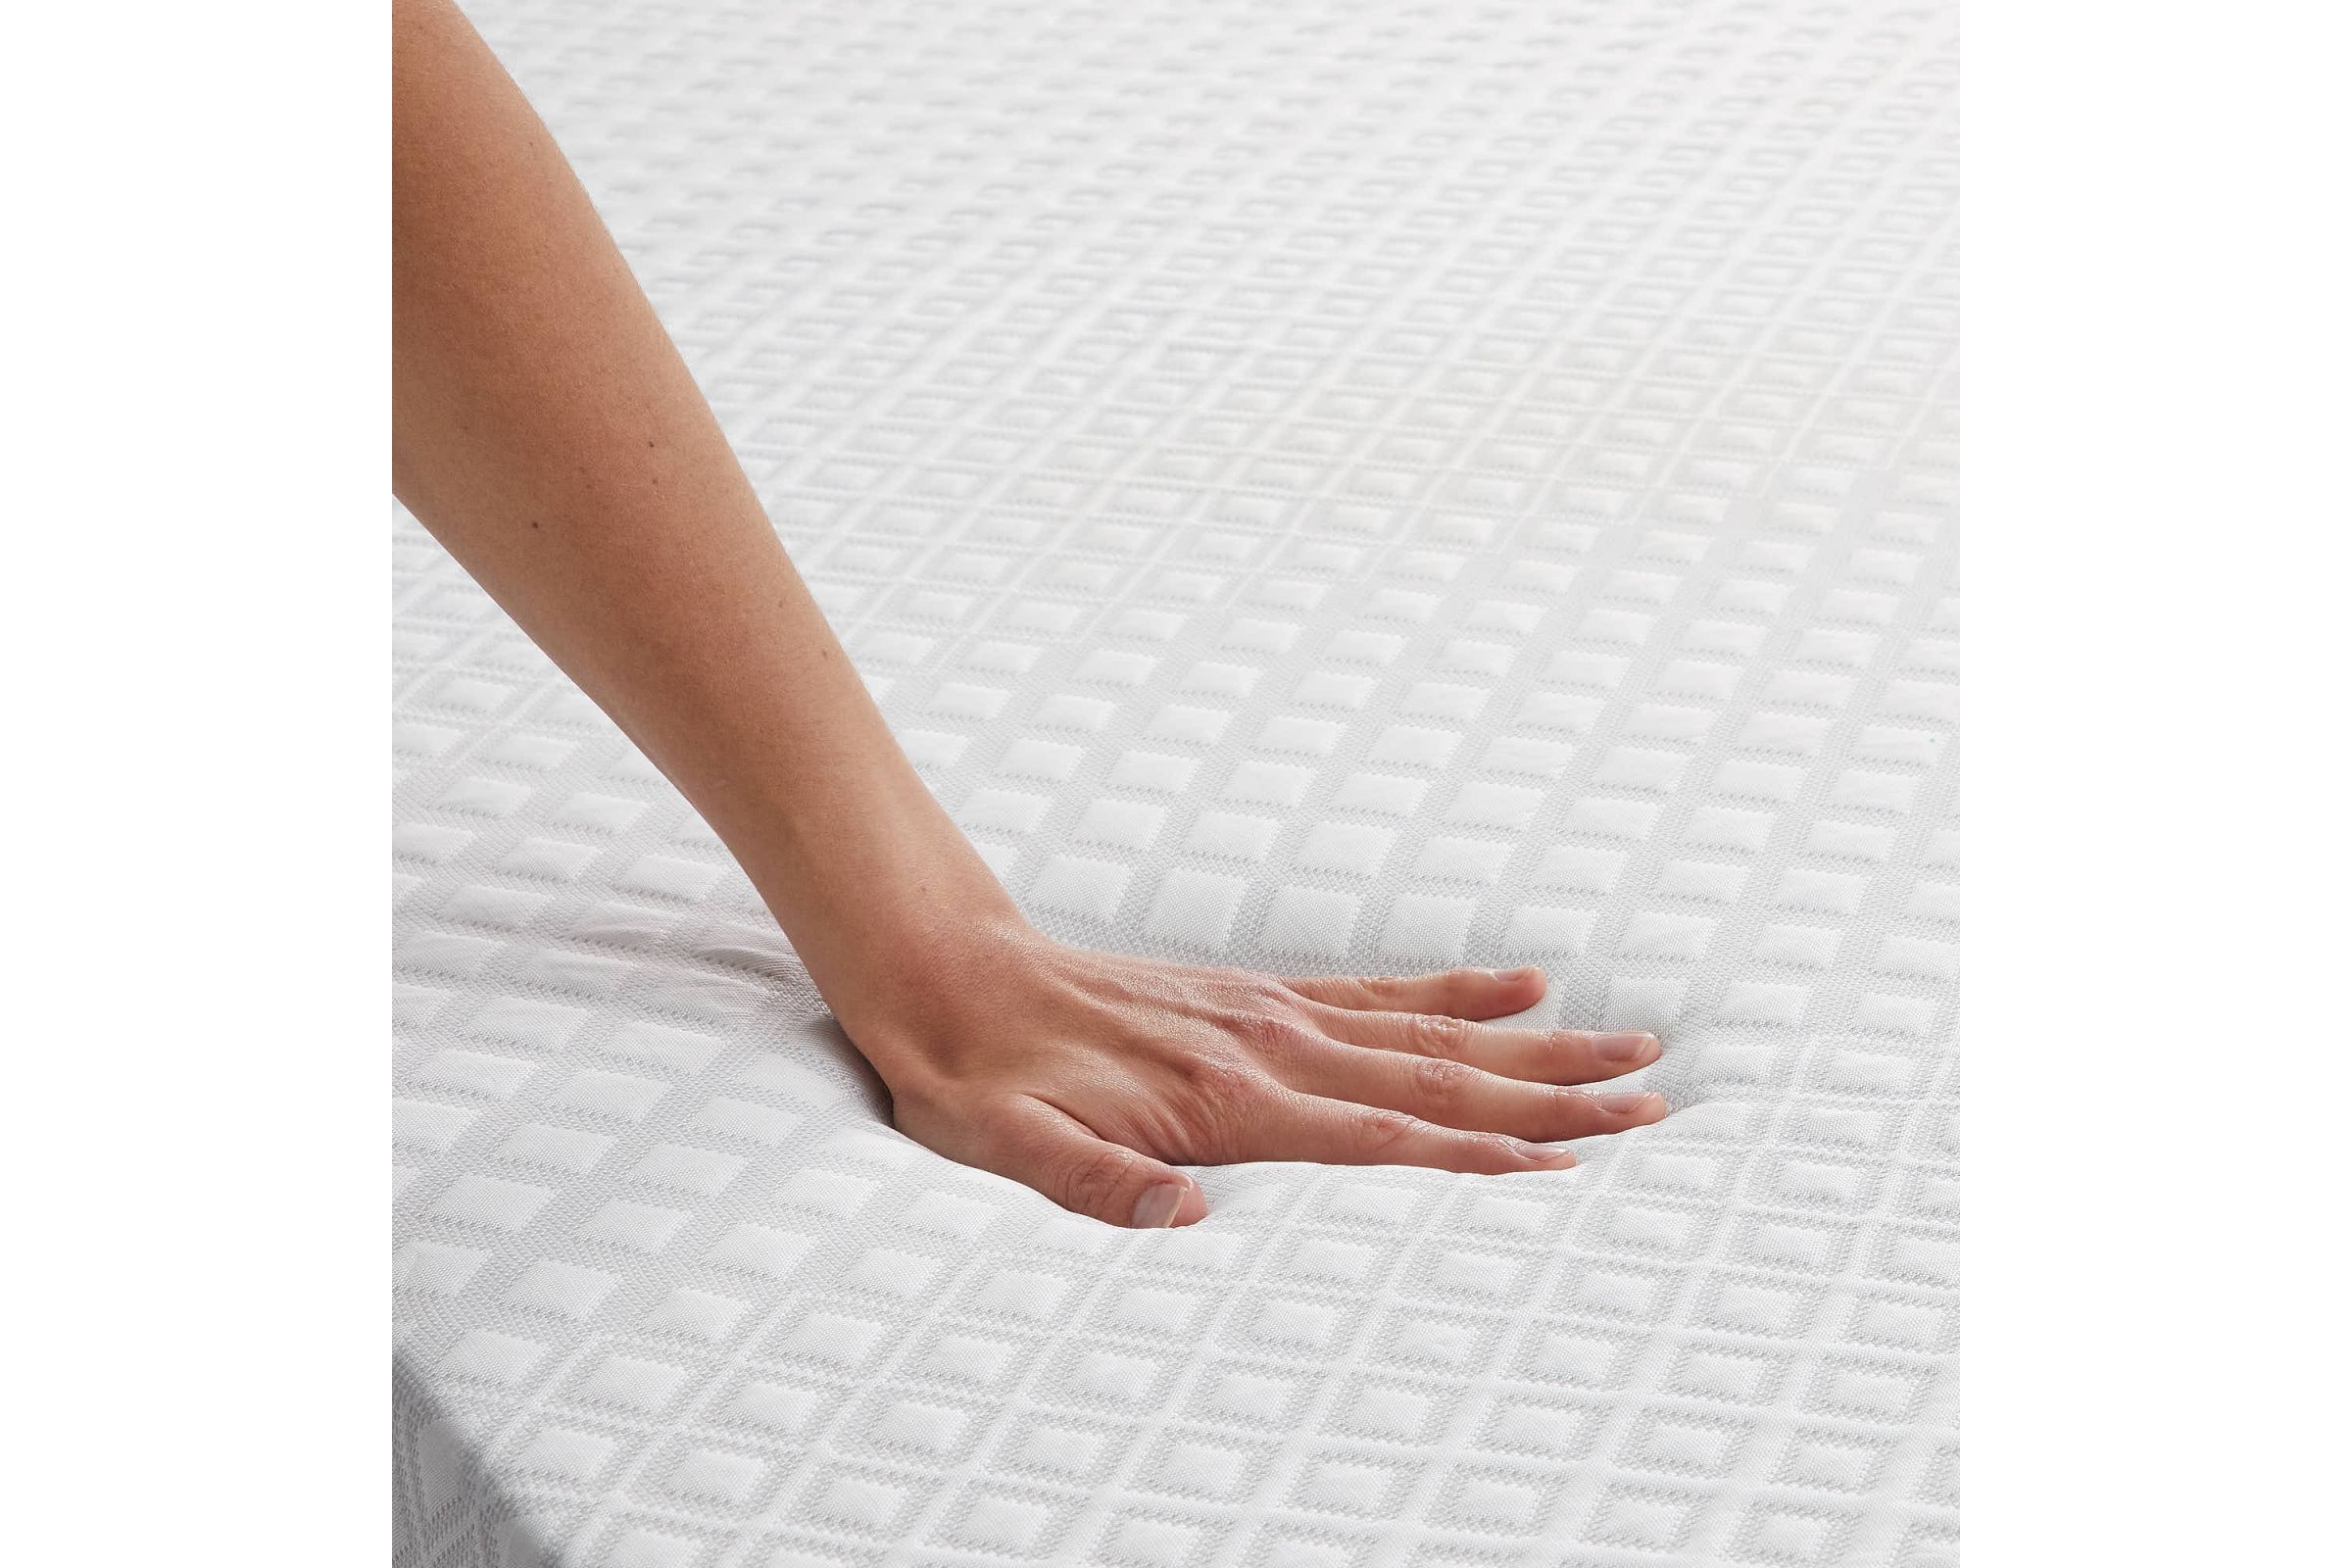 CarbonCool® LT + OmniPhase® Twin XL Mattress Topper